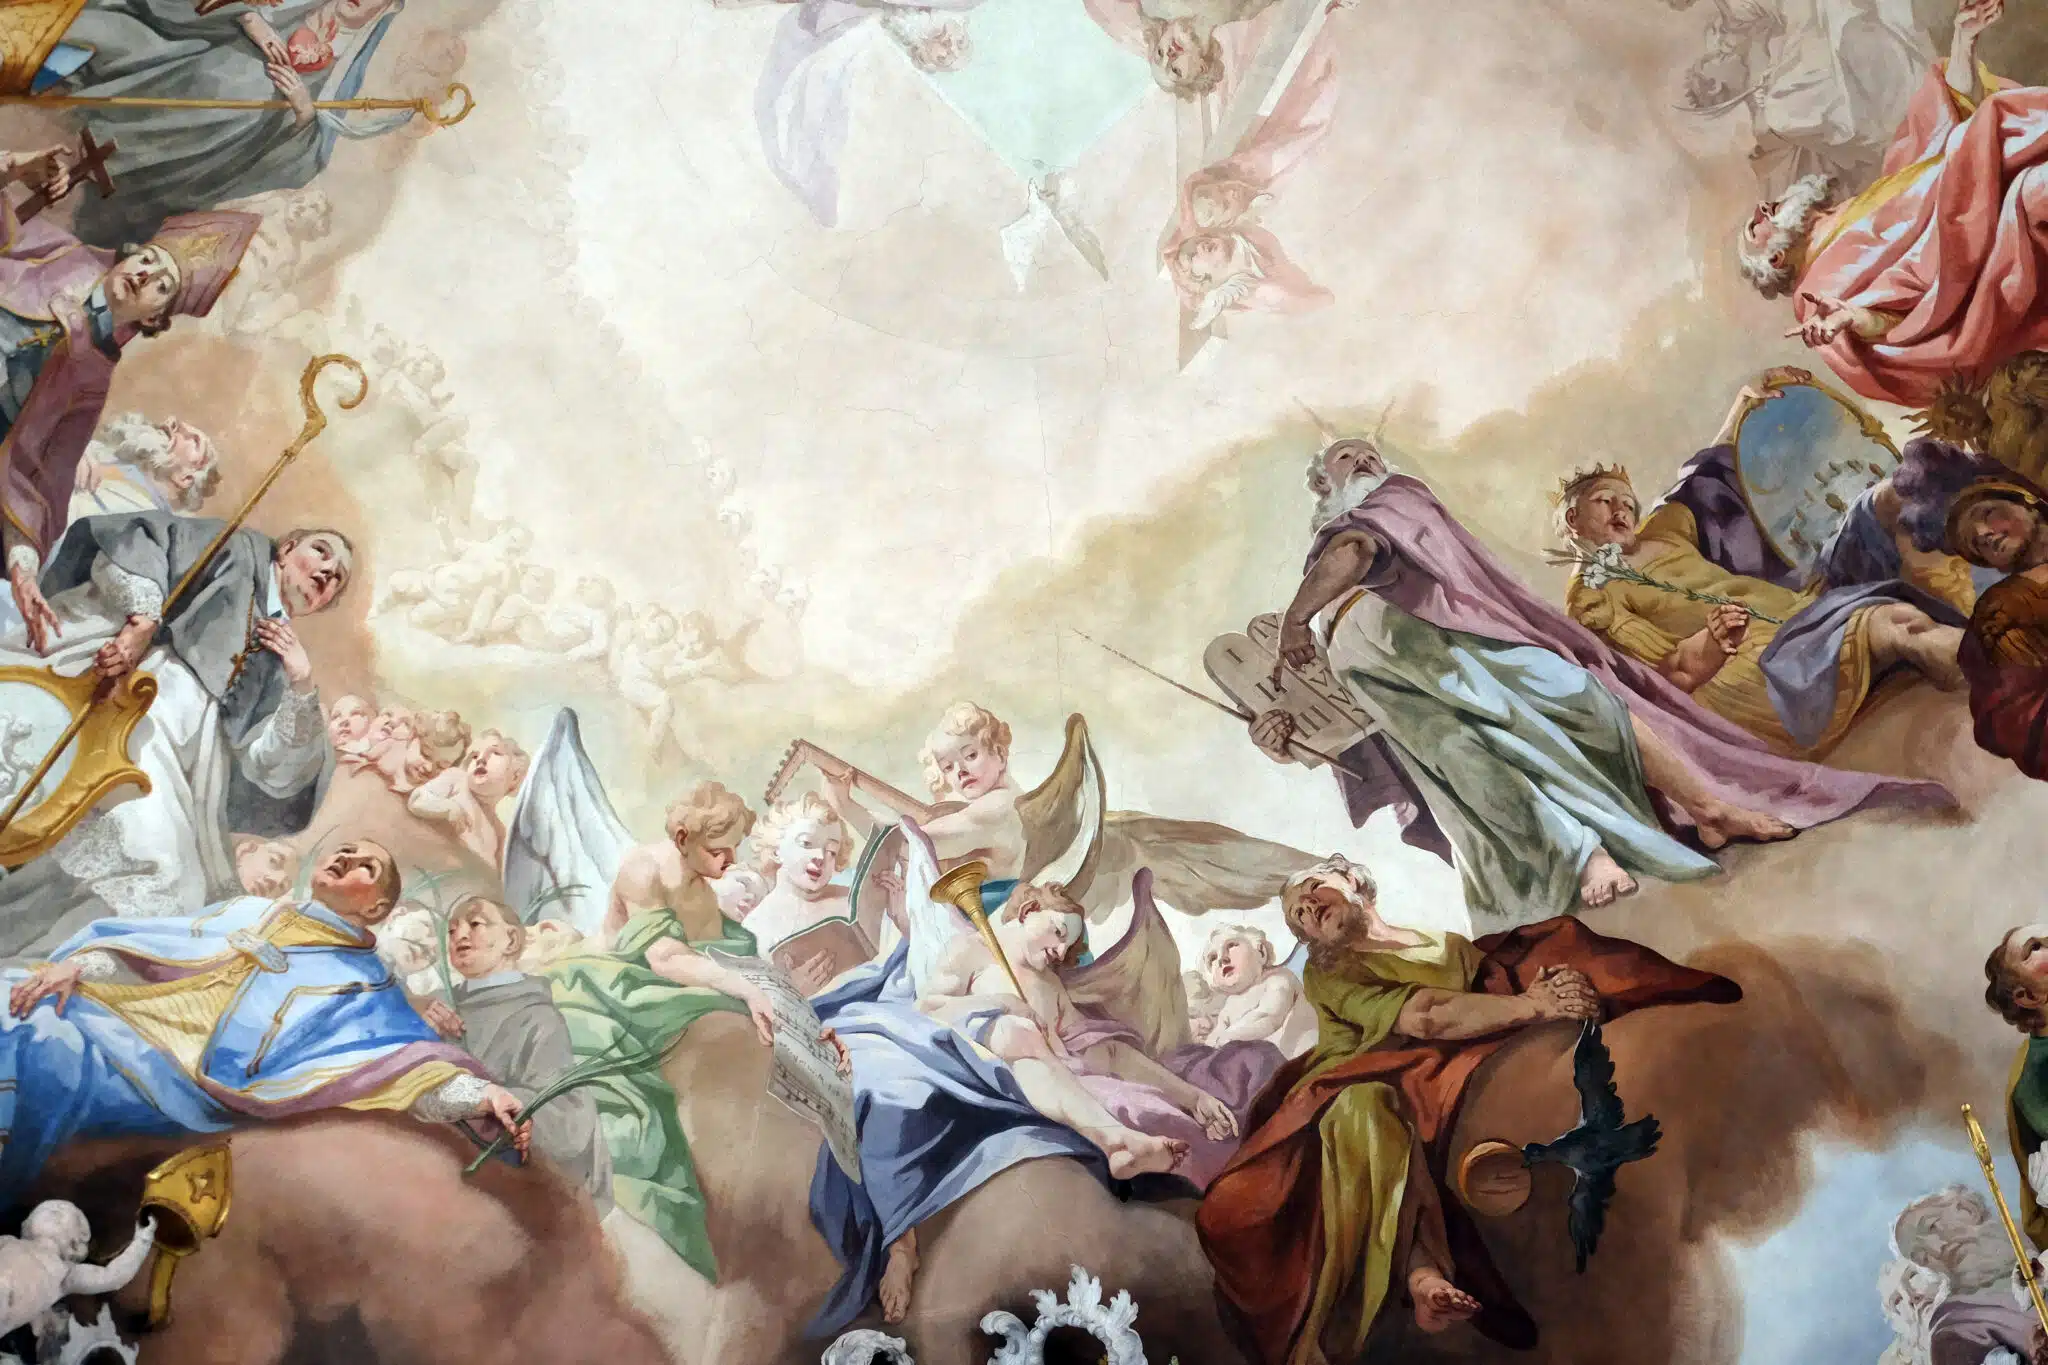 Last Judgment and Glorification of the Benedictine Order, detail of fresco by Matthaus Gunther in Benedictine monastery church in Amorbach, Germany